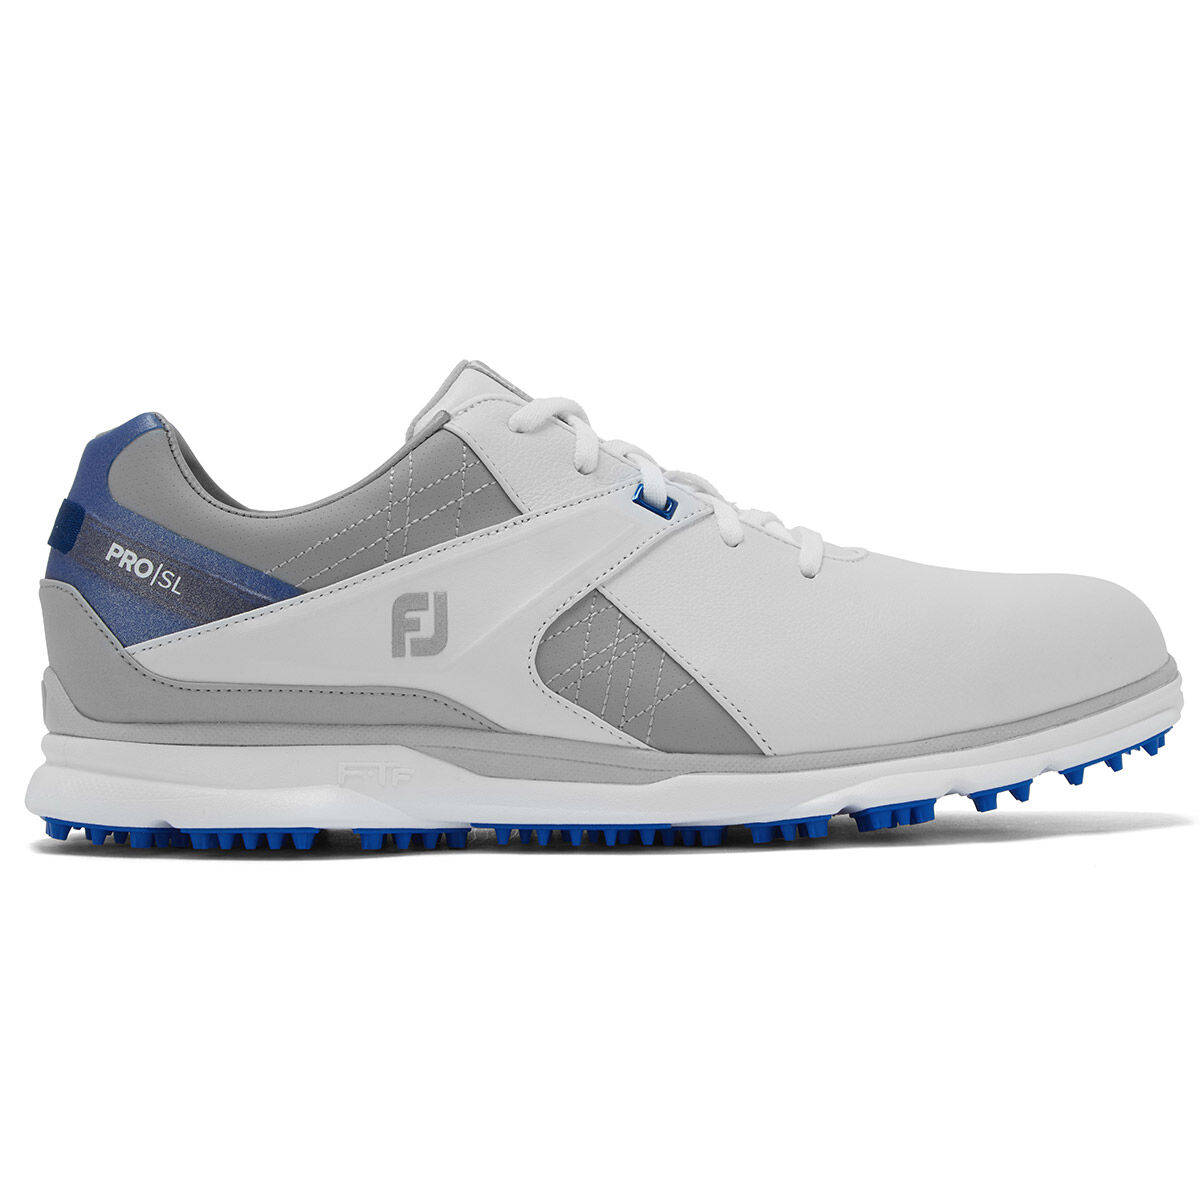 FootJoy Pro SL Shoes 2020 from american 